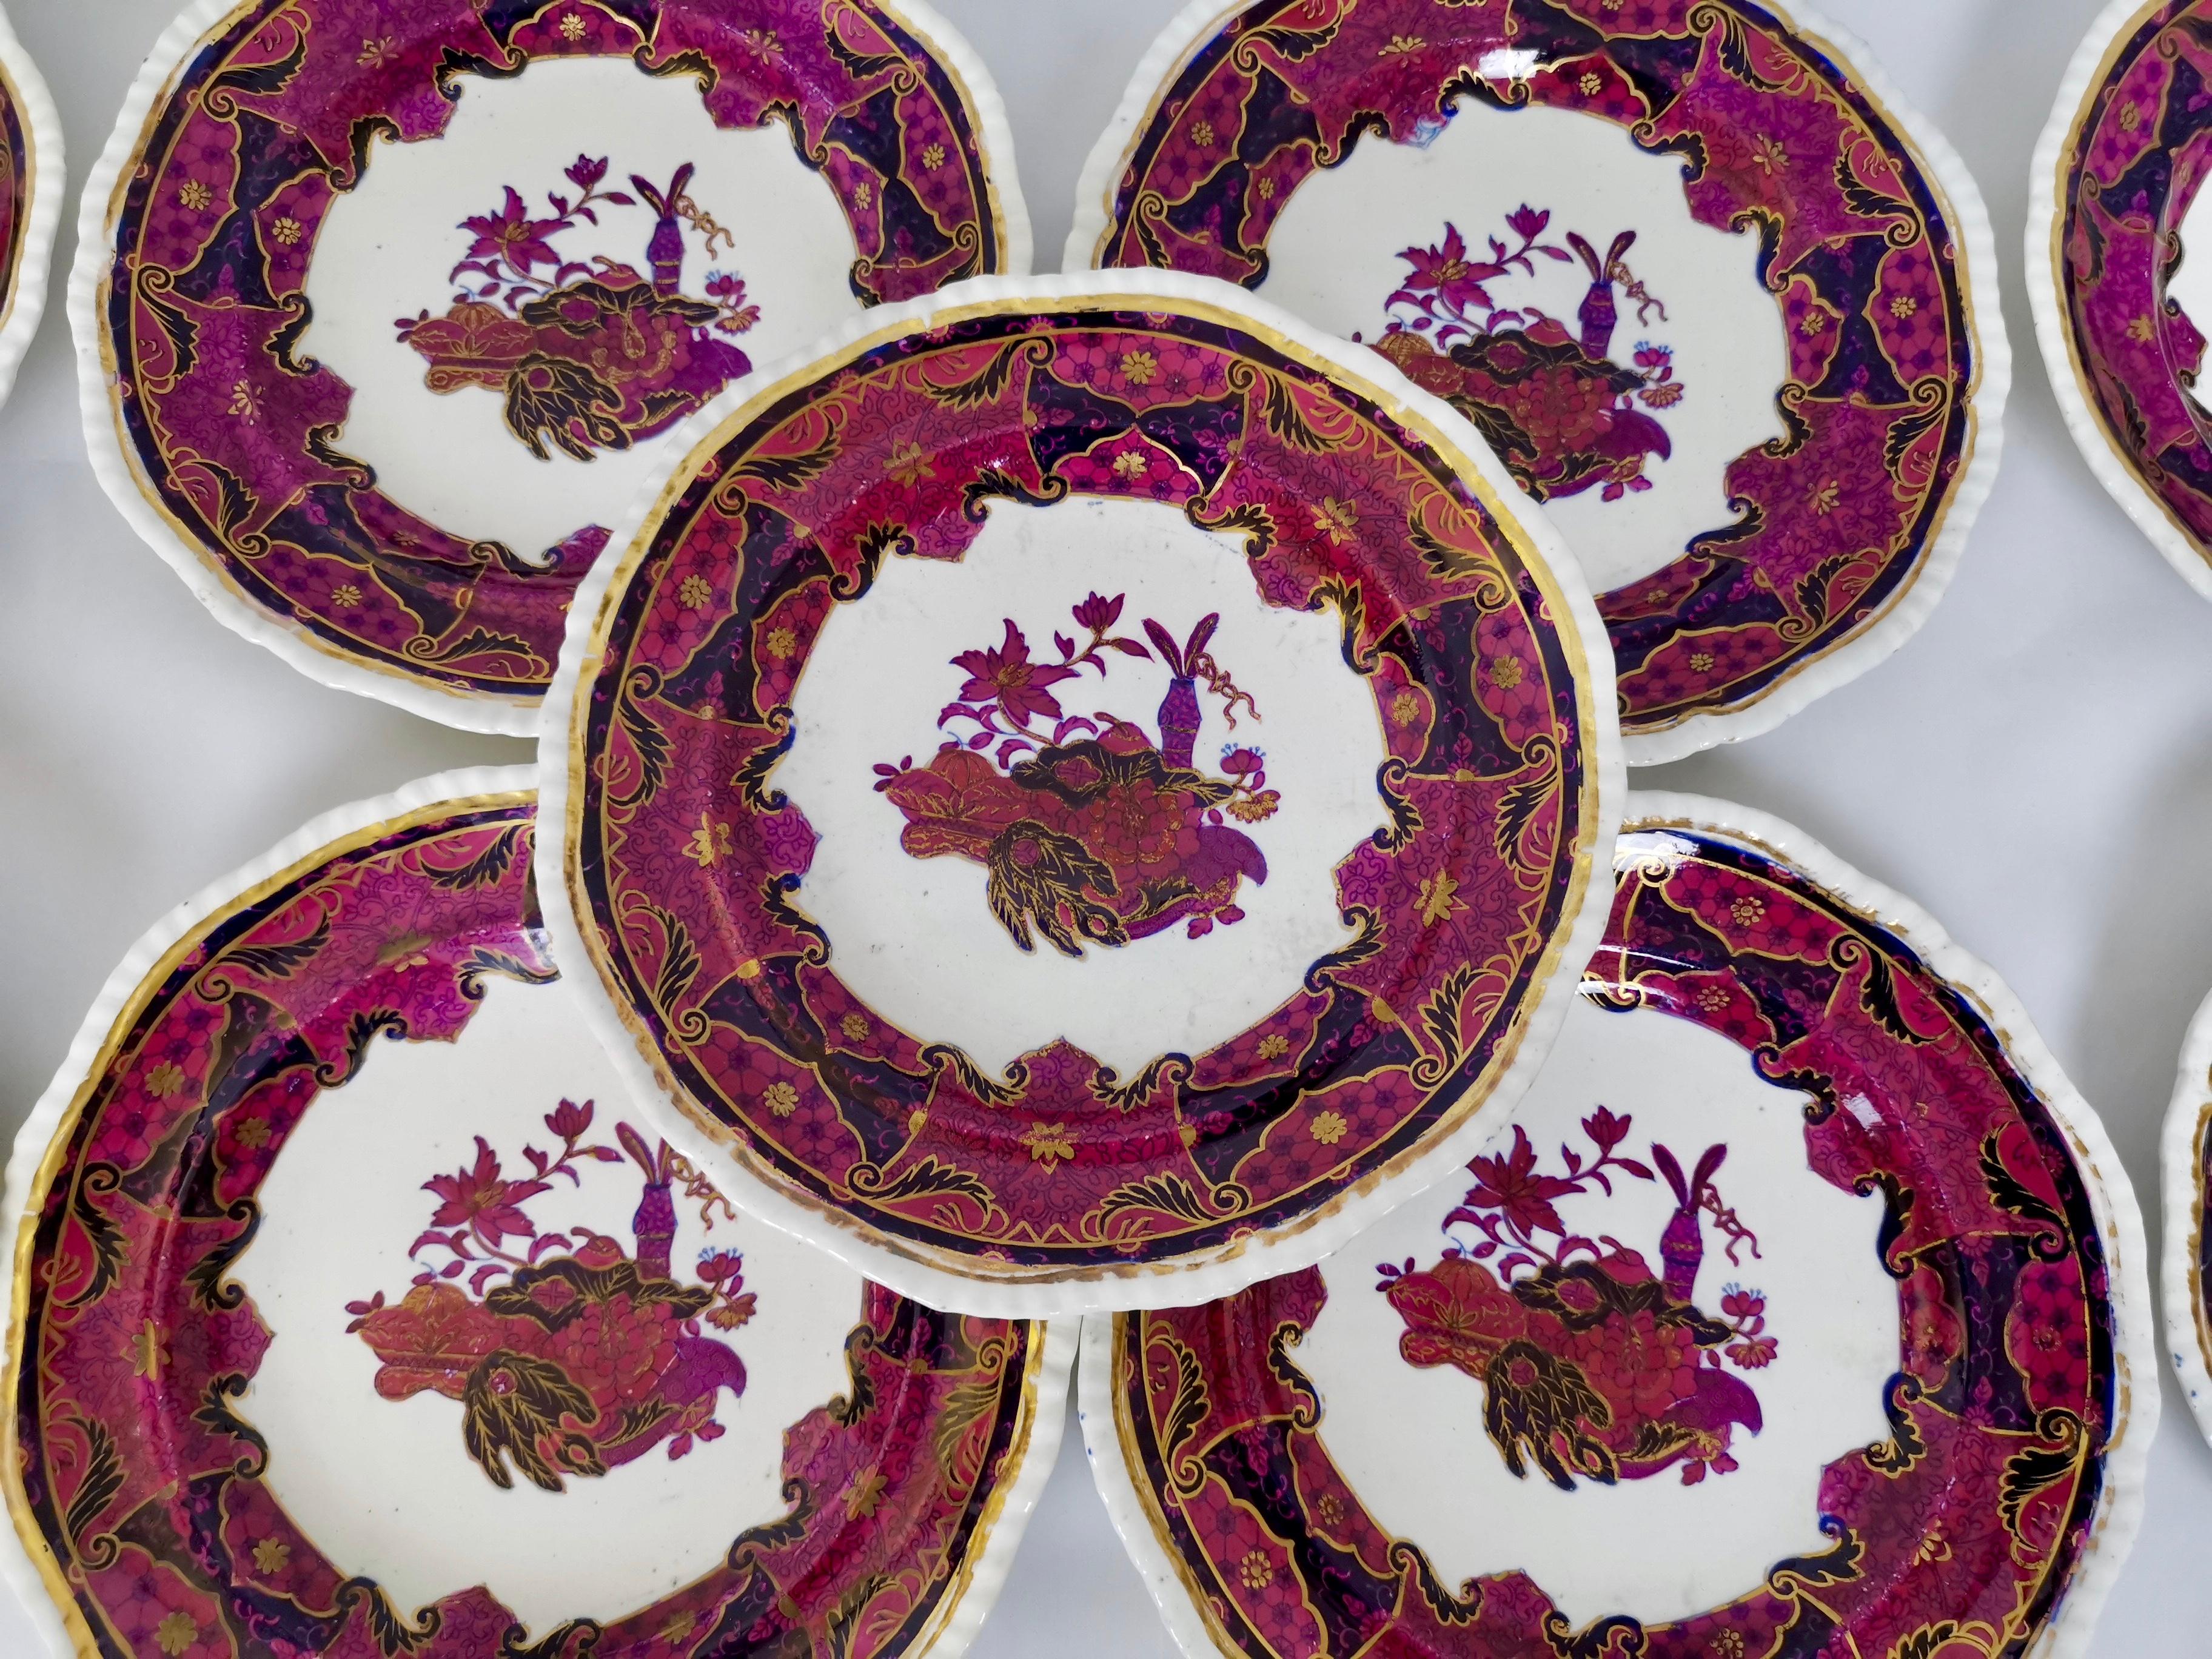 Spode Imperial China Dessert Service, Frog Pattern in Mauve, Regency circa 1828 For Sale 4